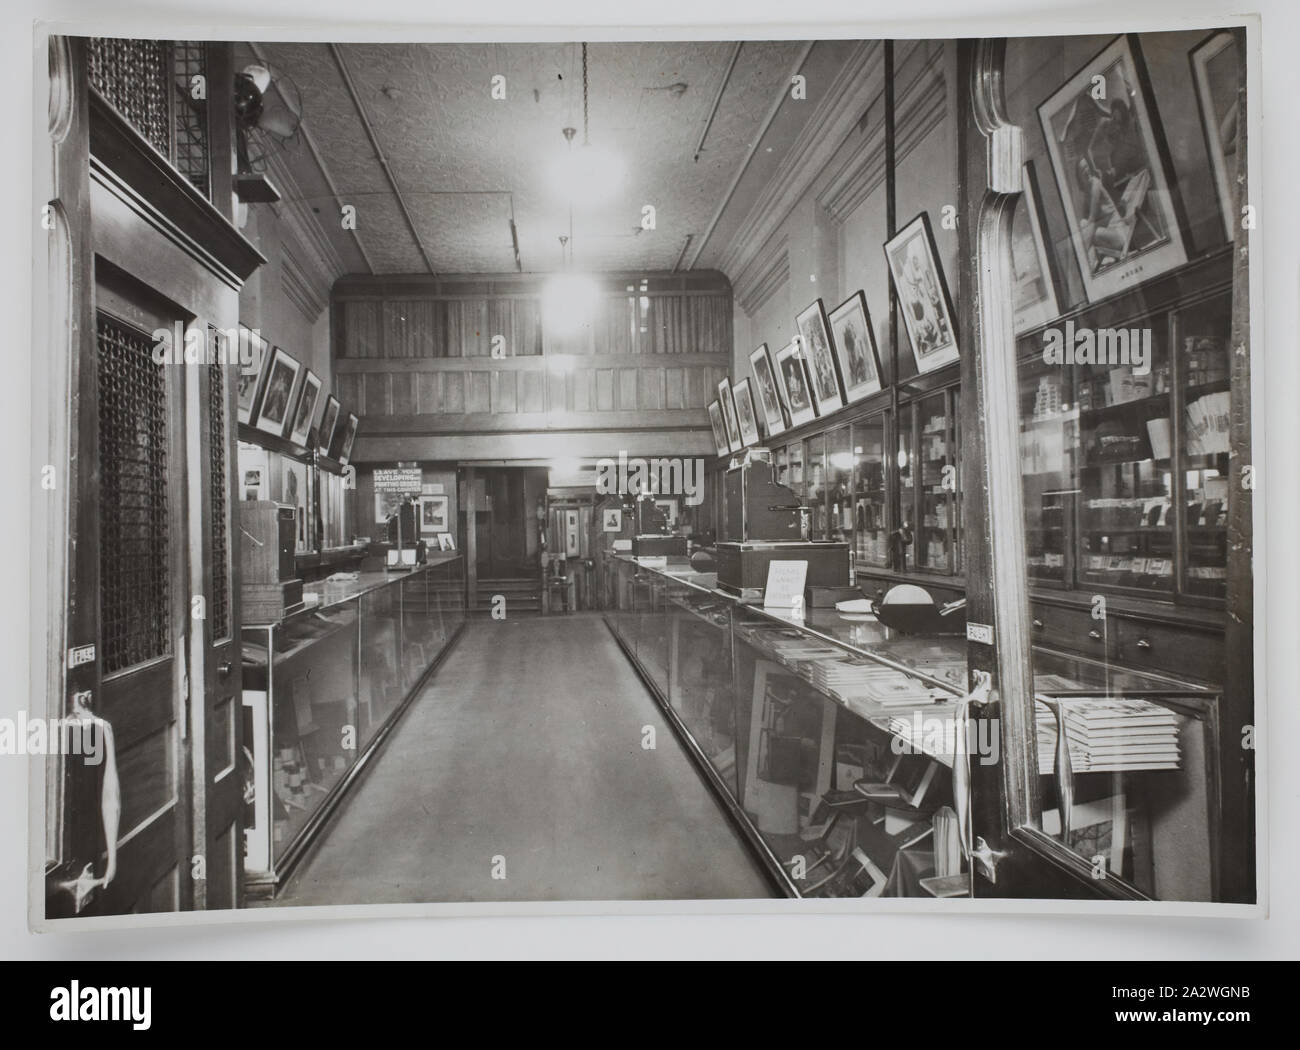 Photograph, Shop Interior, Sydney, New South Wales, circa 1940s, Black and white photograph of the interior of the Kodak Australasia Pty Ltd store in Sydney, New South Wales, circa 1950s. This view shows service counters on the left and right. There are products and posters arranged throughout the store, and a set of stairs at the rear of the room. collection of products, promotional materials, photographs and working life Stock Photo